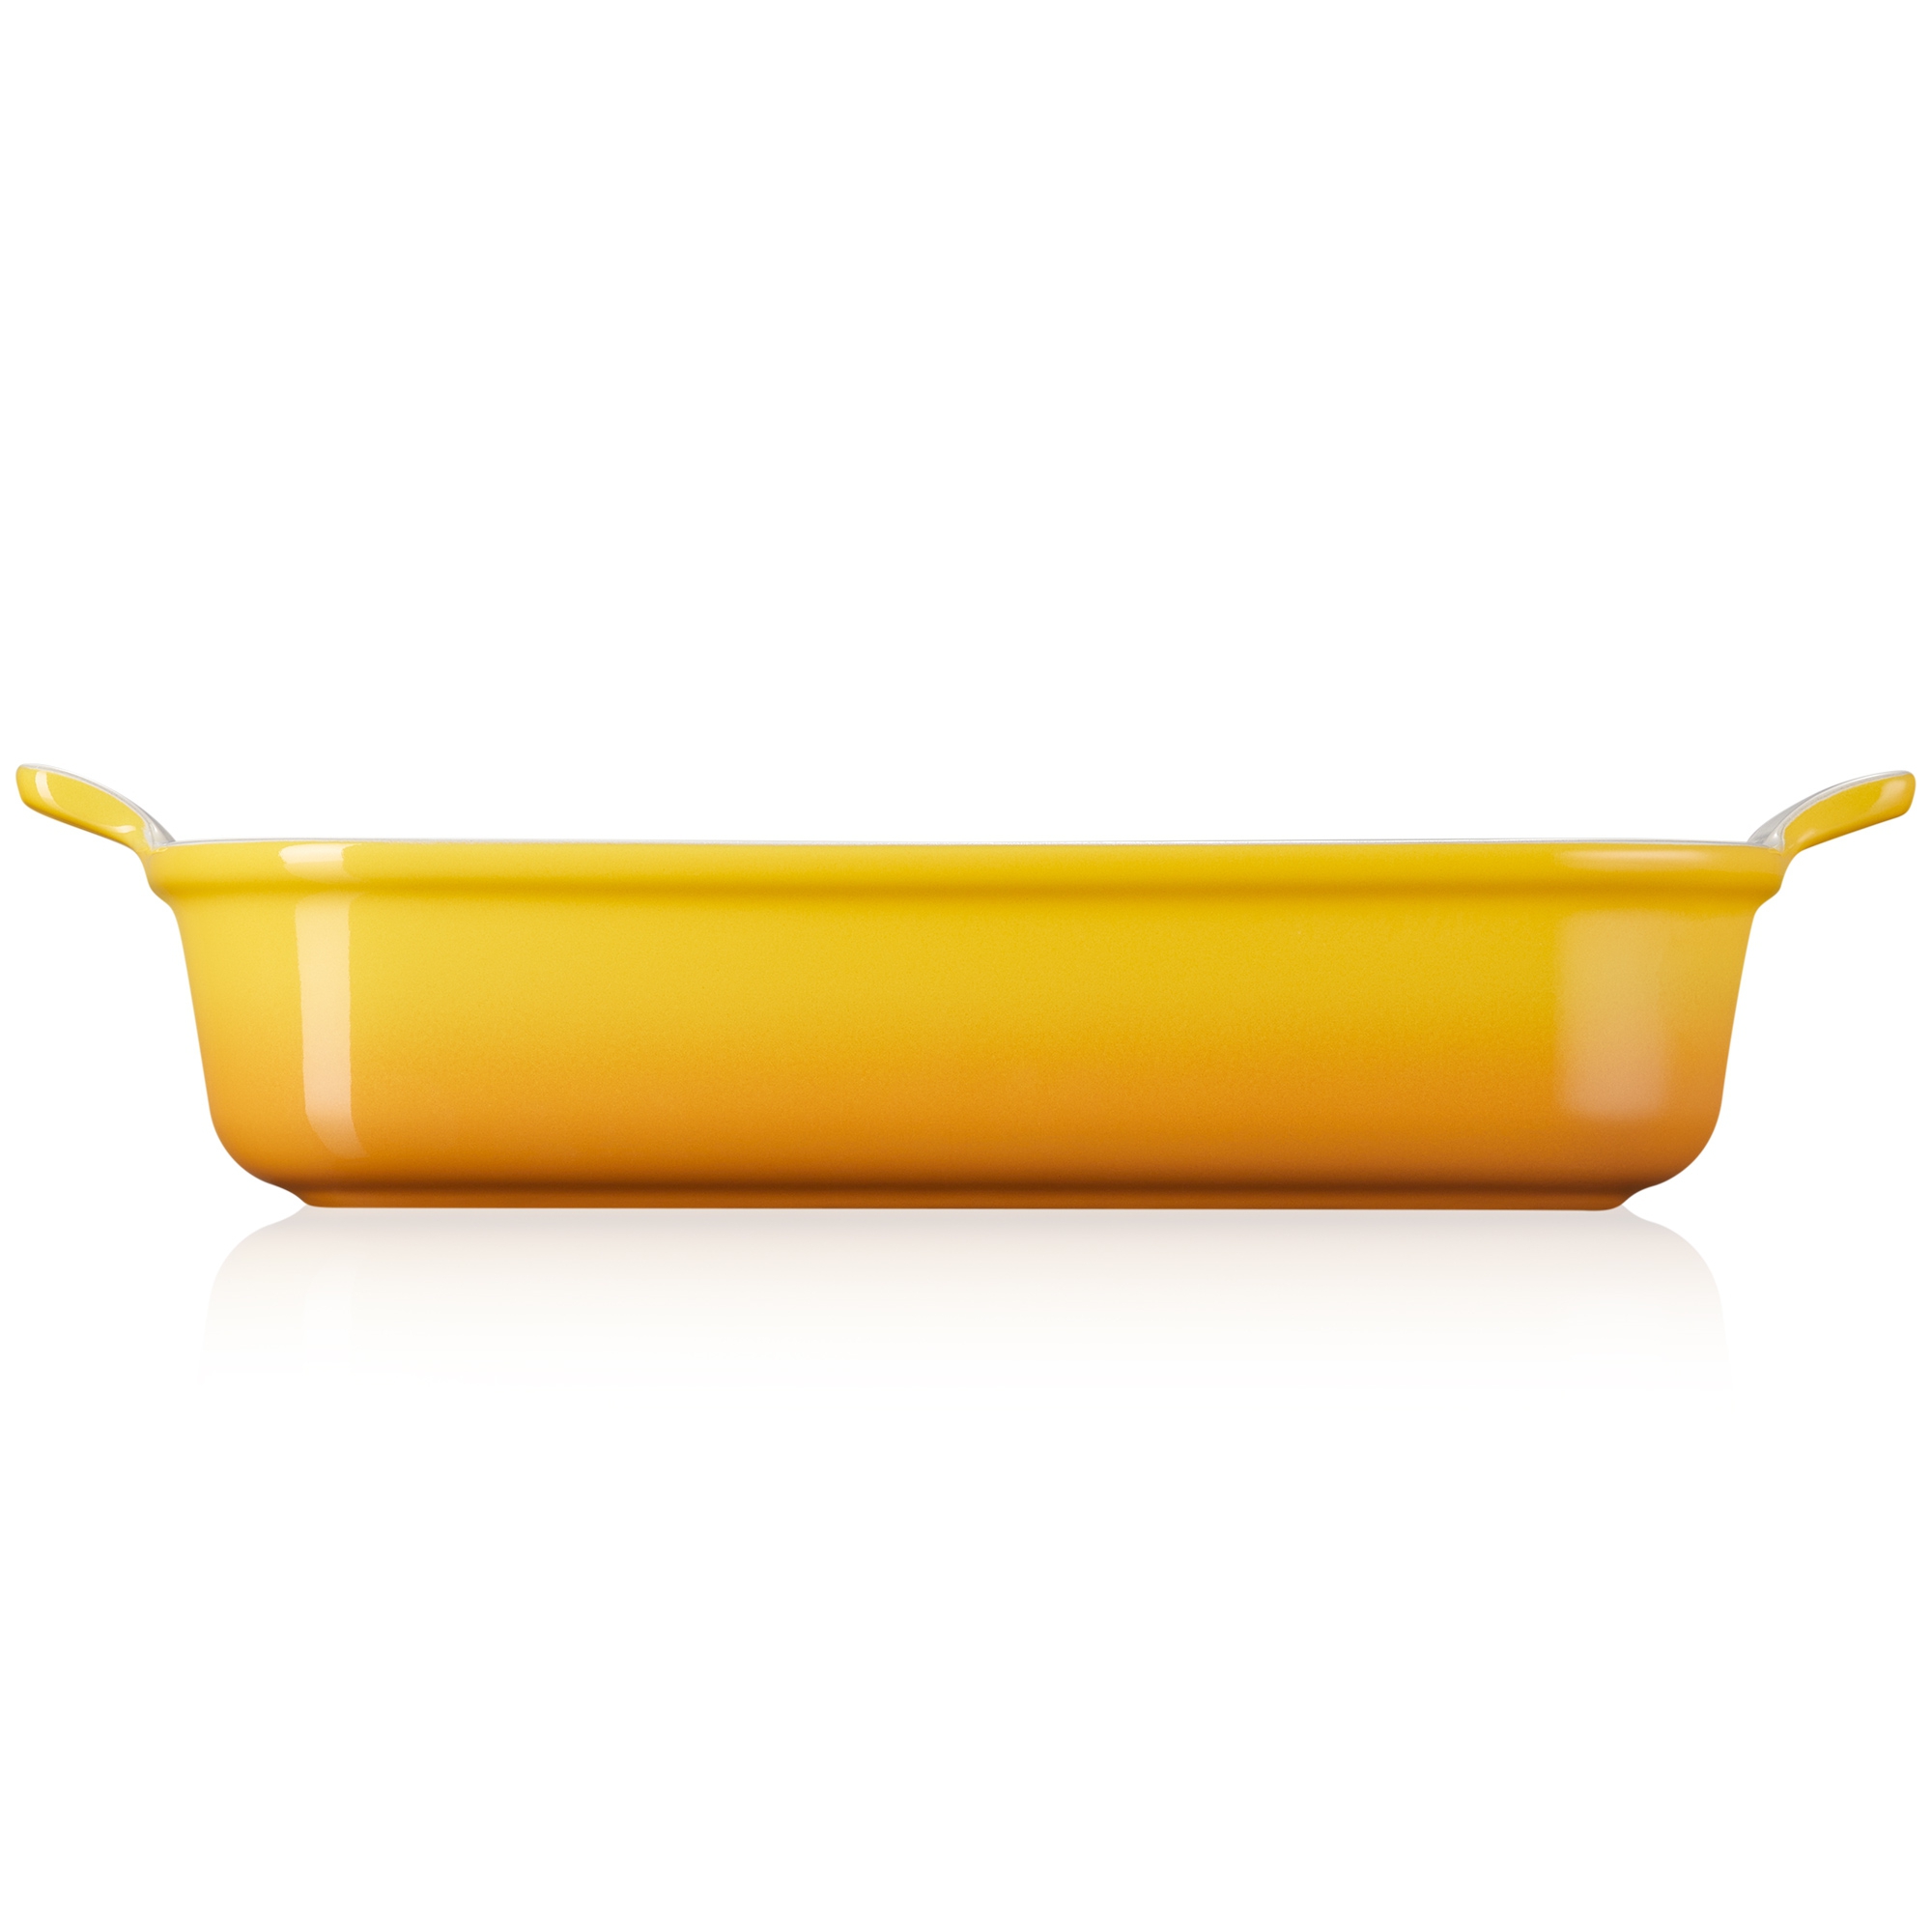 Le Creuset - Baking Dish Tradition - Heritage